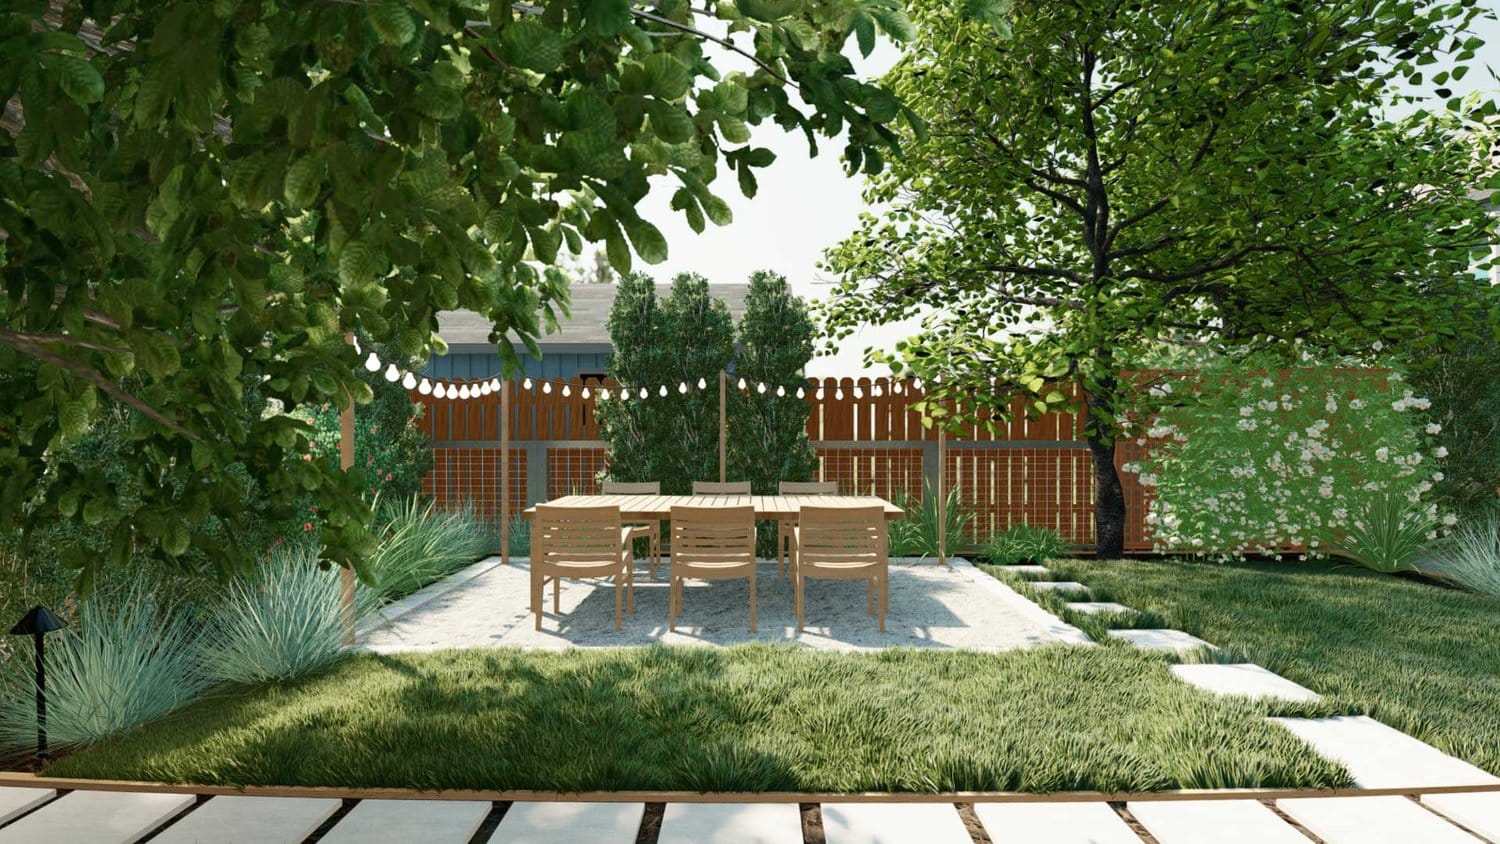 Arlington backyard garden with concrete paver paths and string lights over patio with dining set